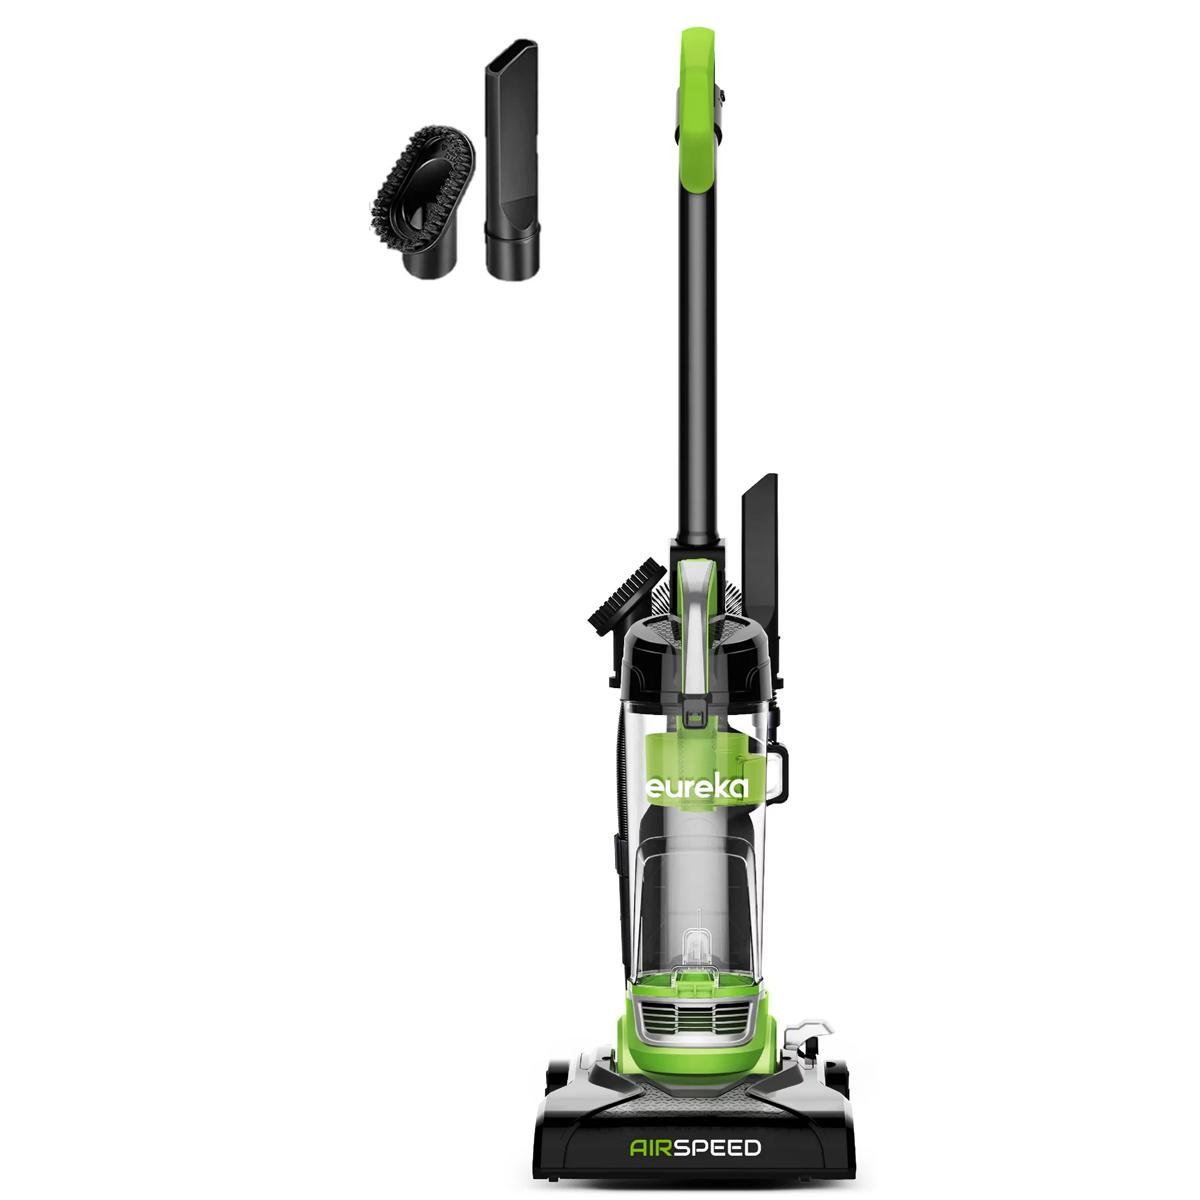 Eureka Airspeed Bagless Upright Vacuum Cleaner for $49.88 Shipped